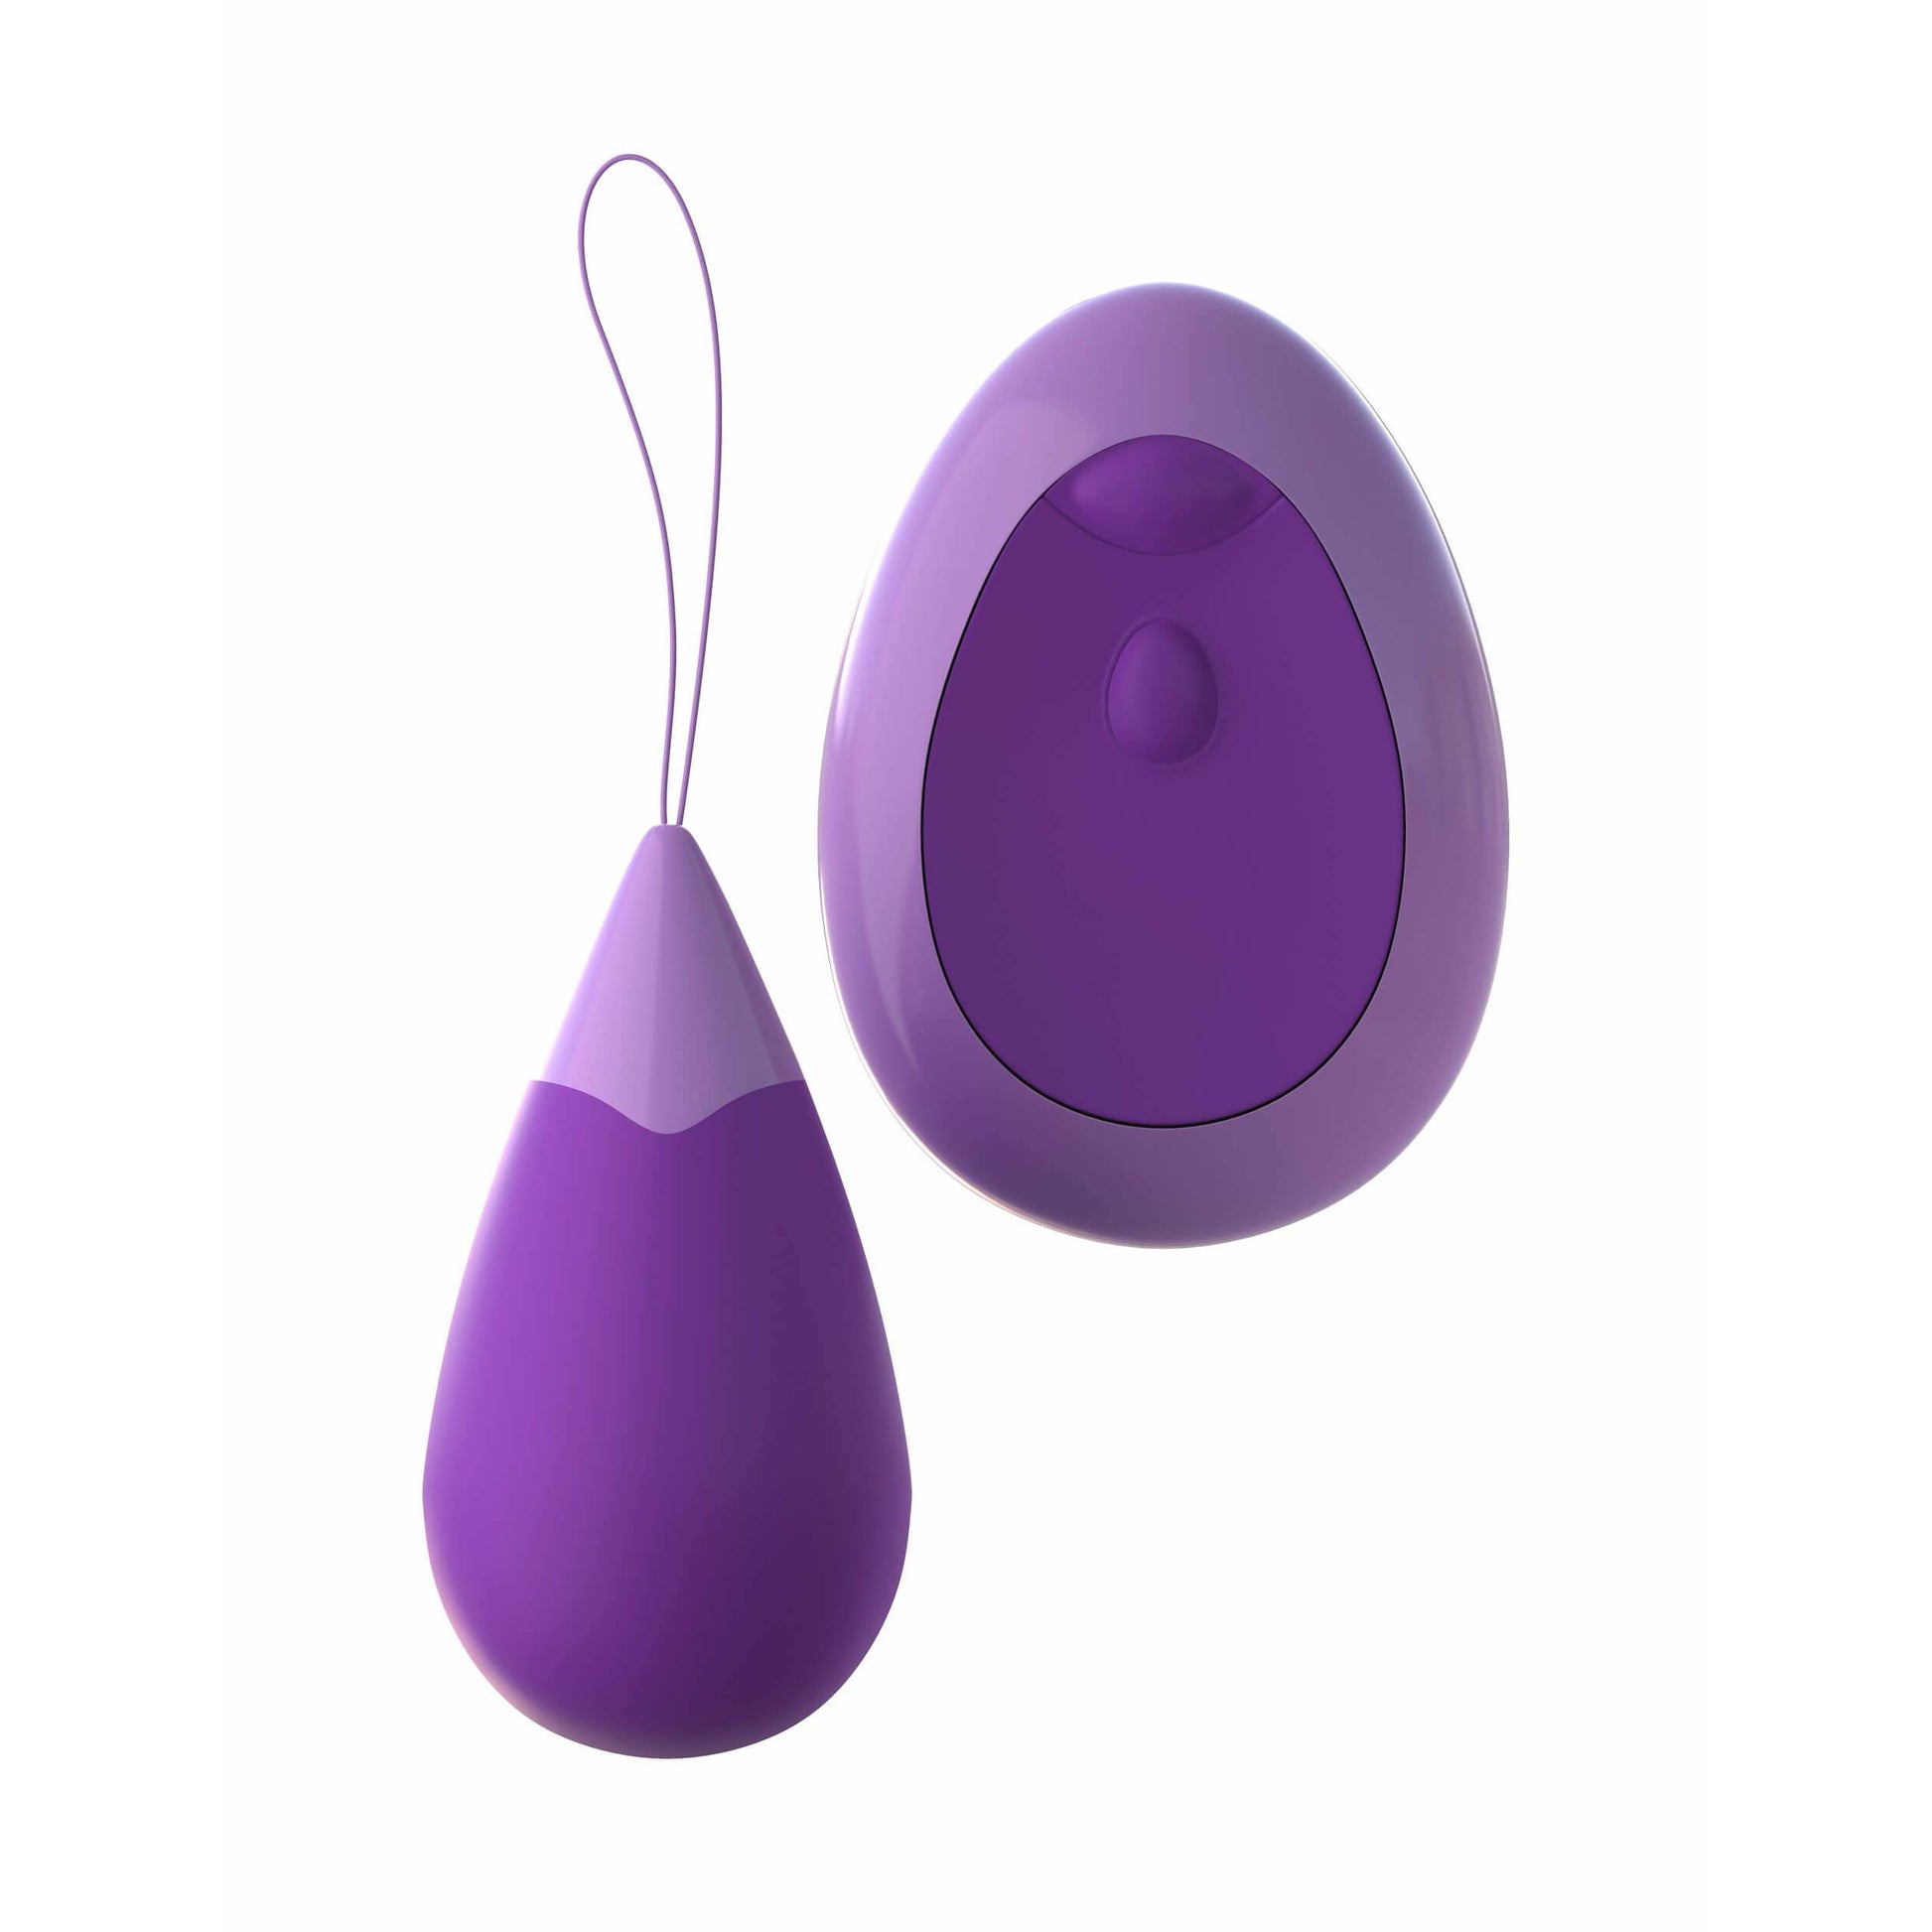 Piperdream Fantasy For Her Remote Kegel Excite-Her  -  The Bigger O an online sex toy shop USA, Canada & UK shipping available